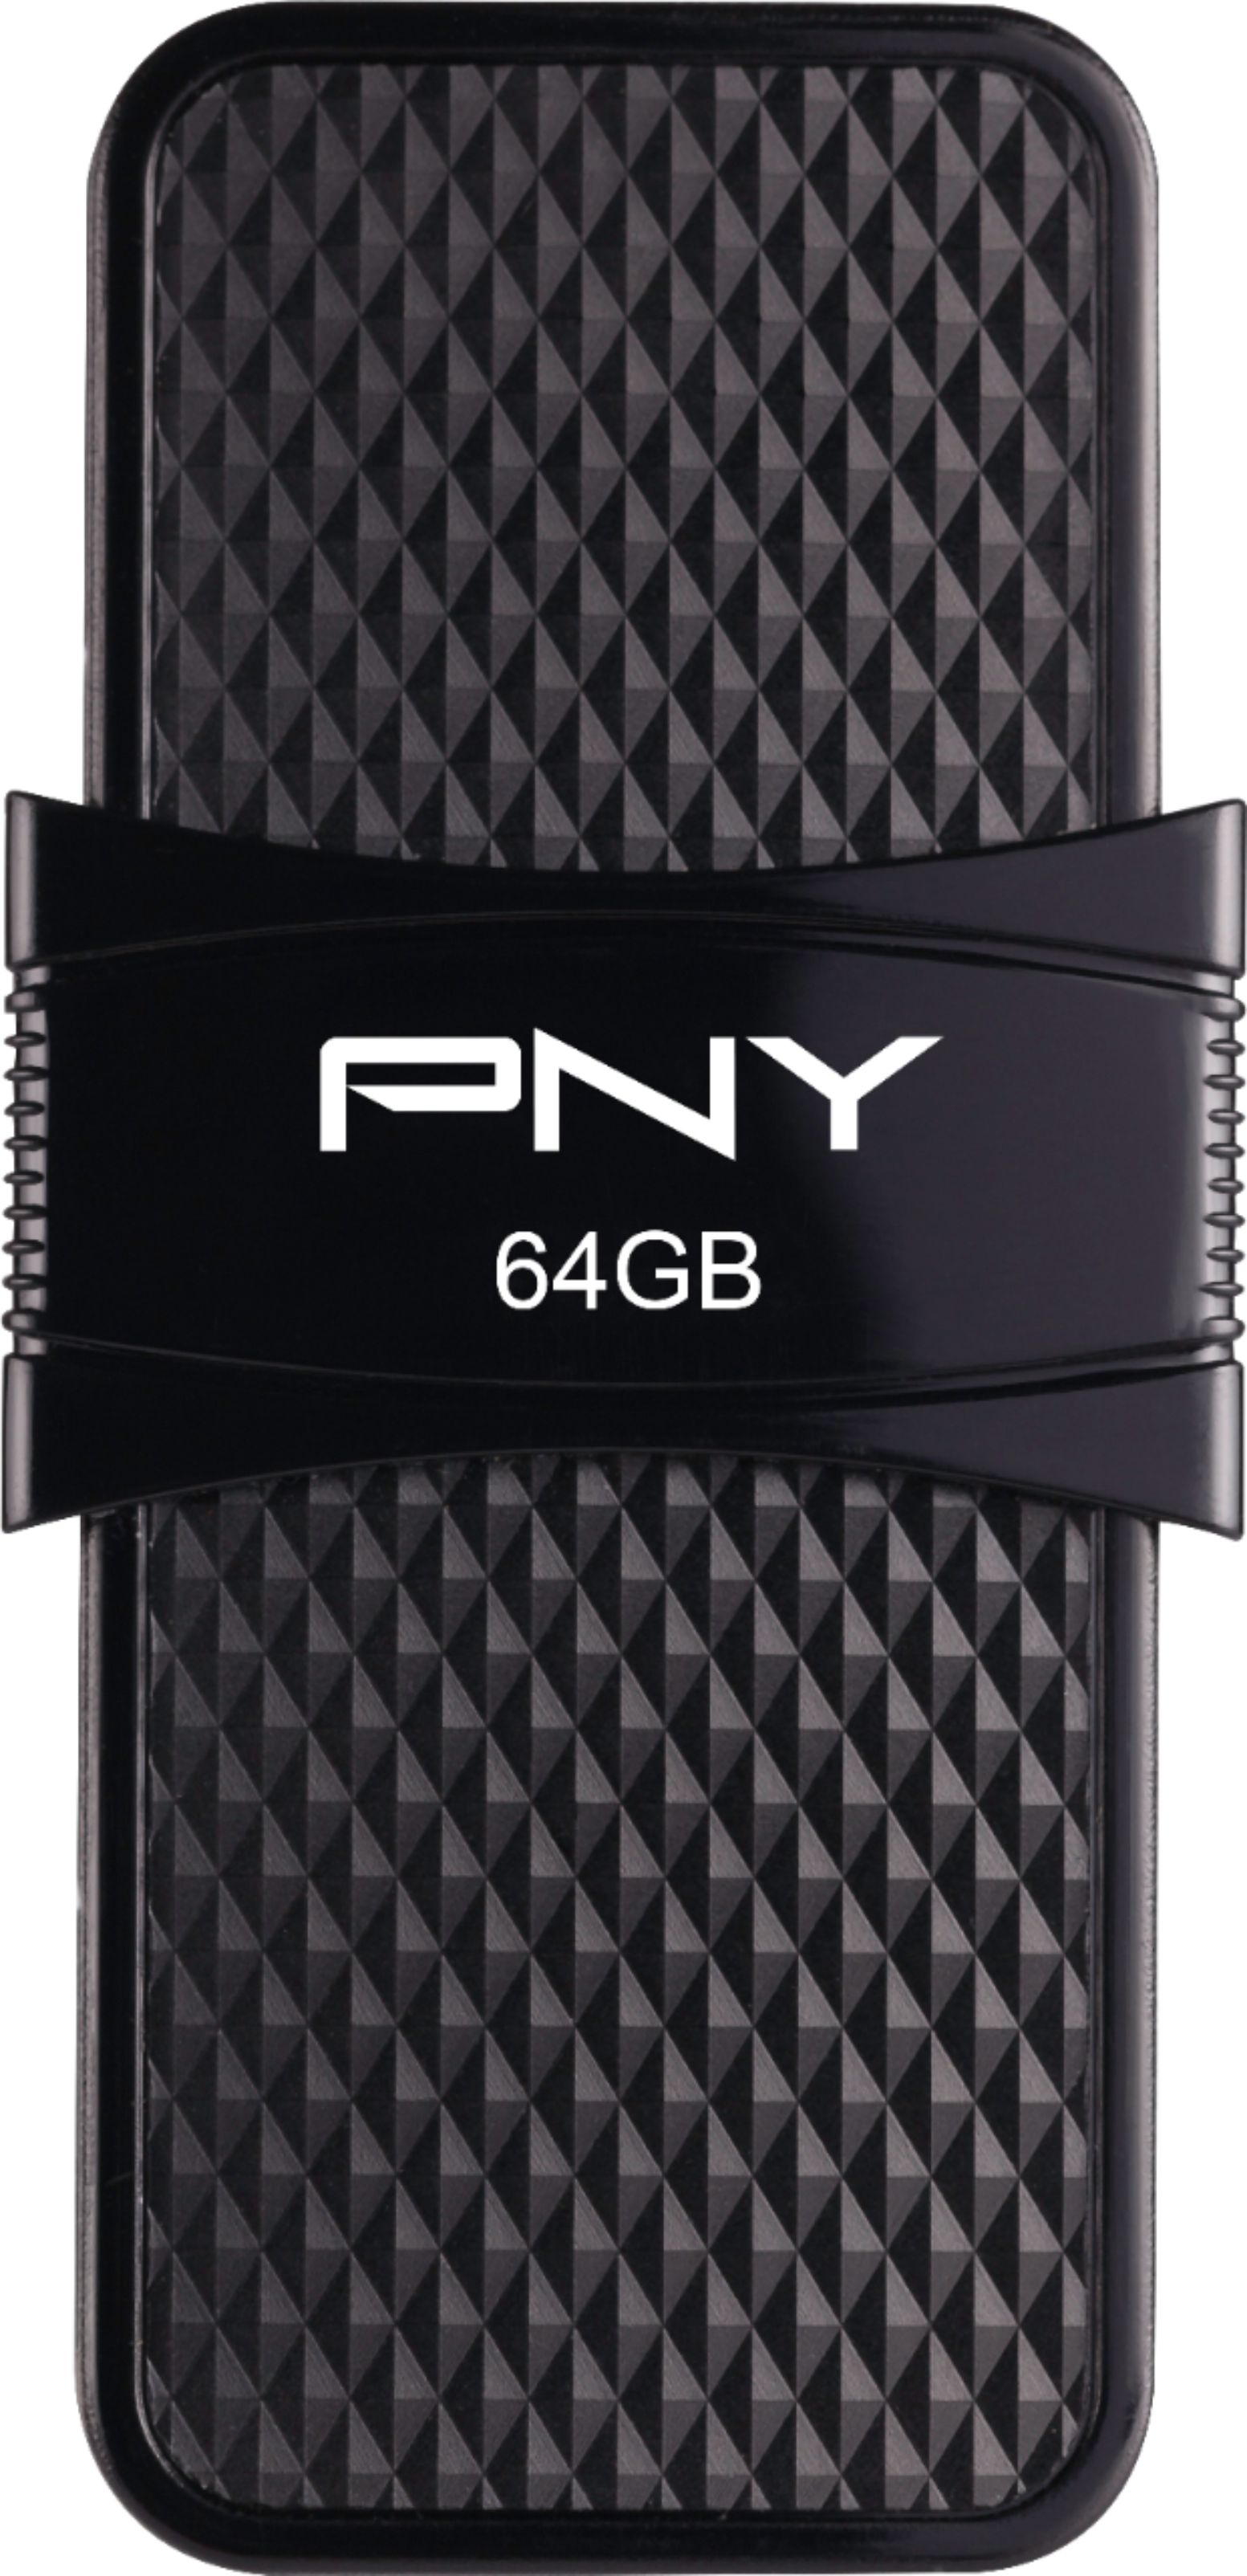 PNY - 64GB Duo Link USB 3.1 Type-C OTG Flash Drive for Androids and Computers - Mobile Storage for Photos, Videos, & More